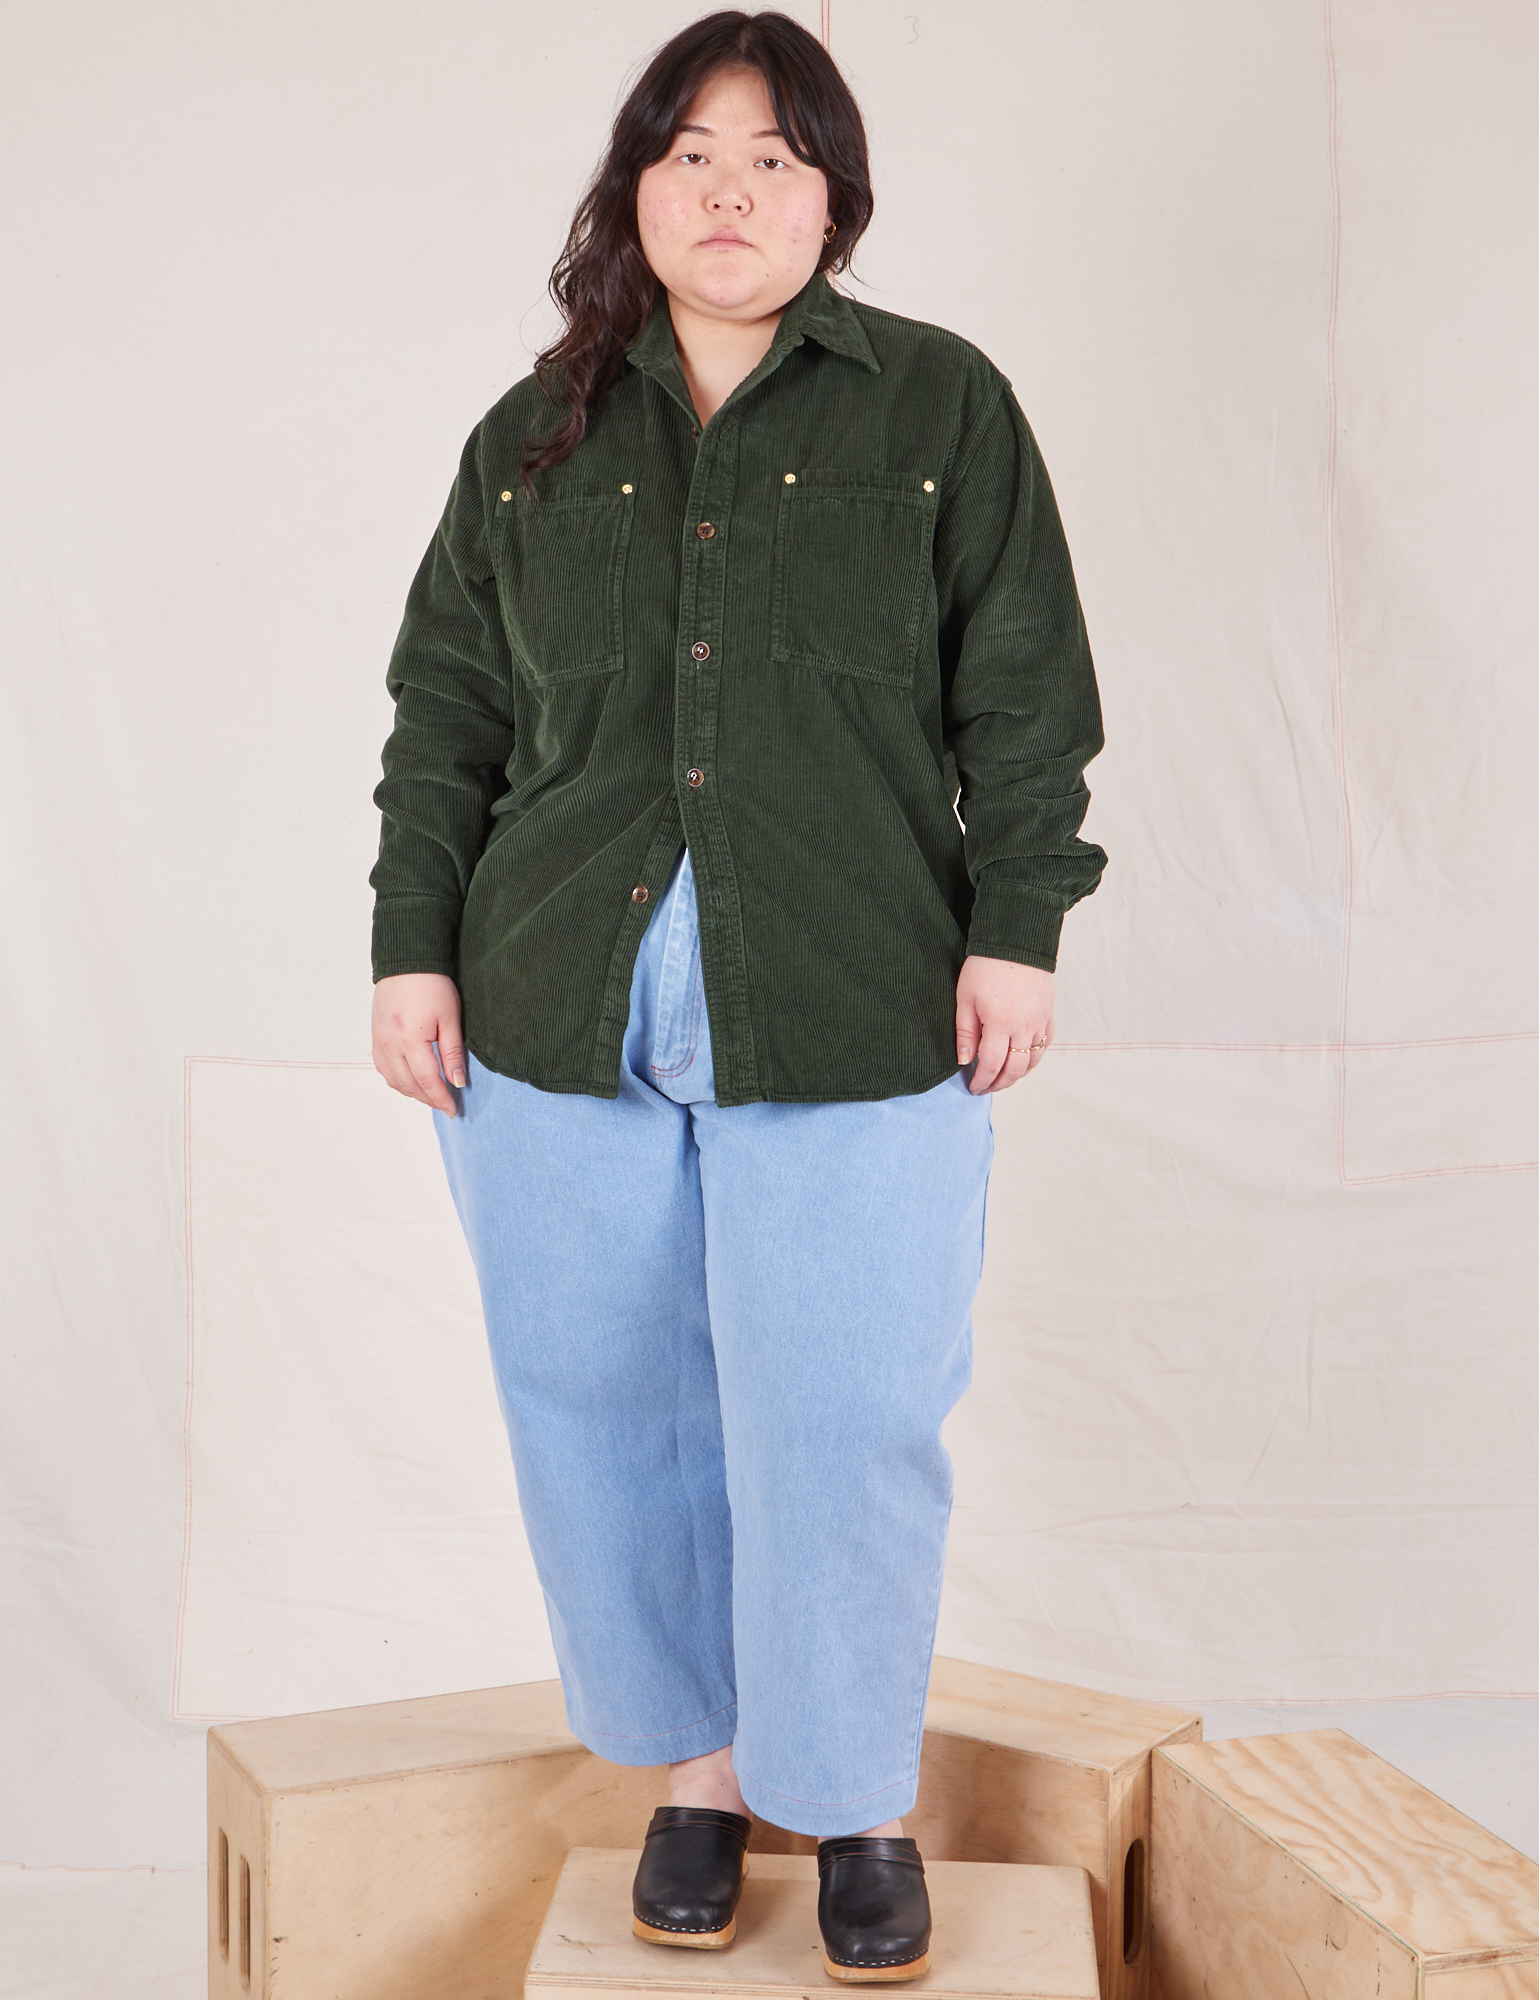 Ashley is wearing a buttoned up Corduroy Overshirt in Swamp Green and light wash Denim Trouser Jeans